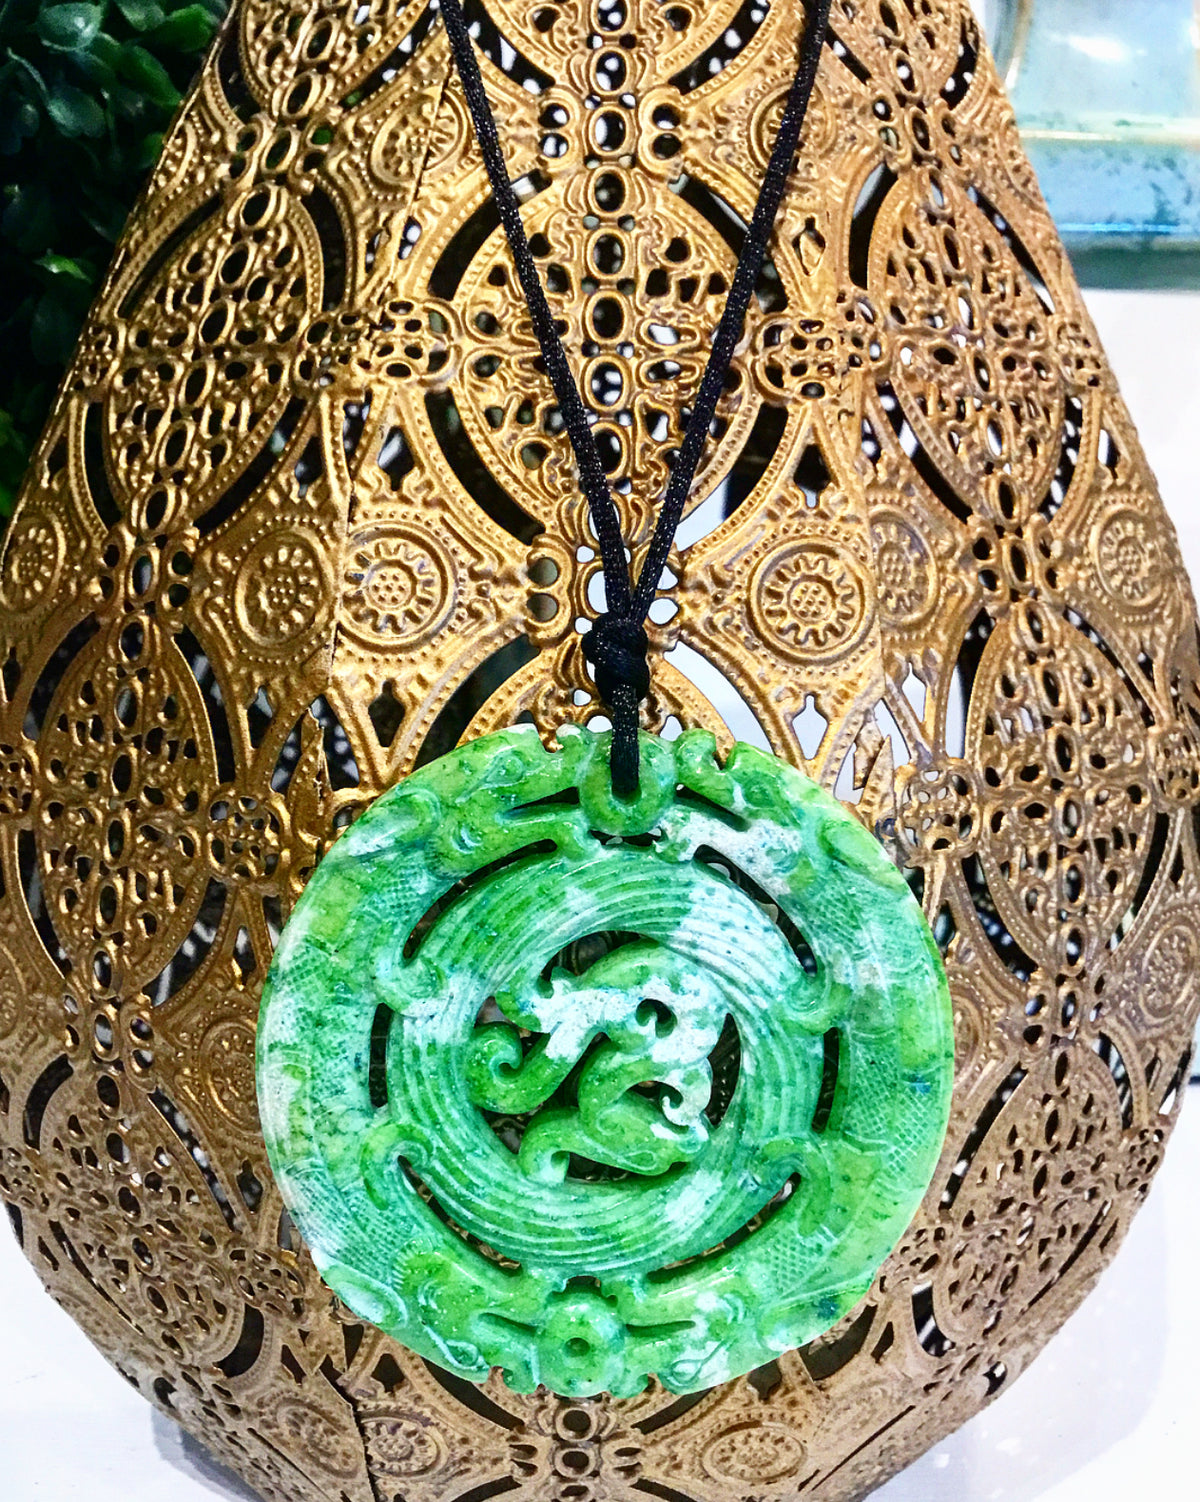 Friday Favorite: Gorgeous & New Teramasu Carved Green Jade Pendant on Black Silk Satin Necklace with Freshwater Pearl Toggle